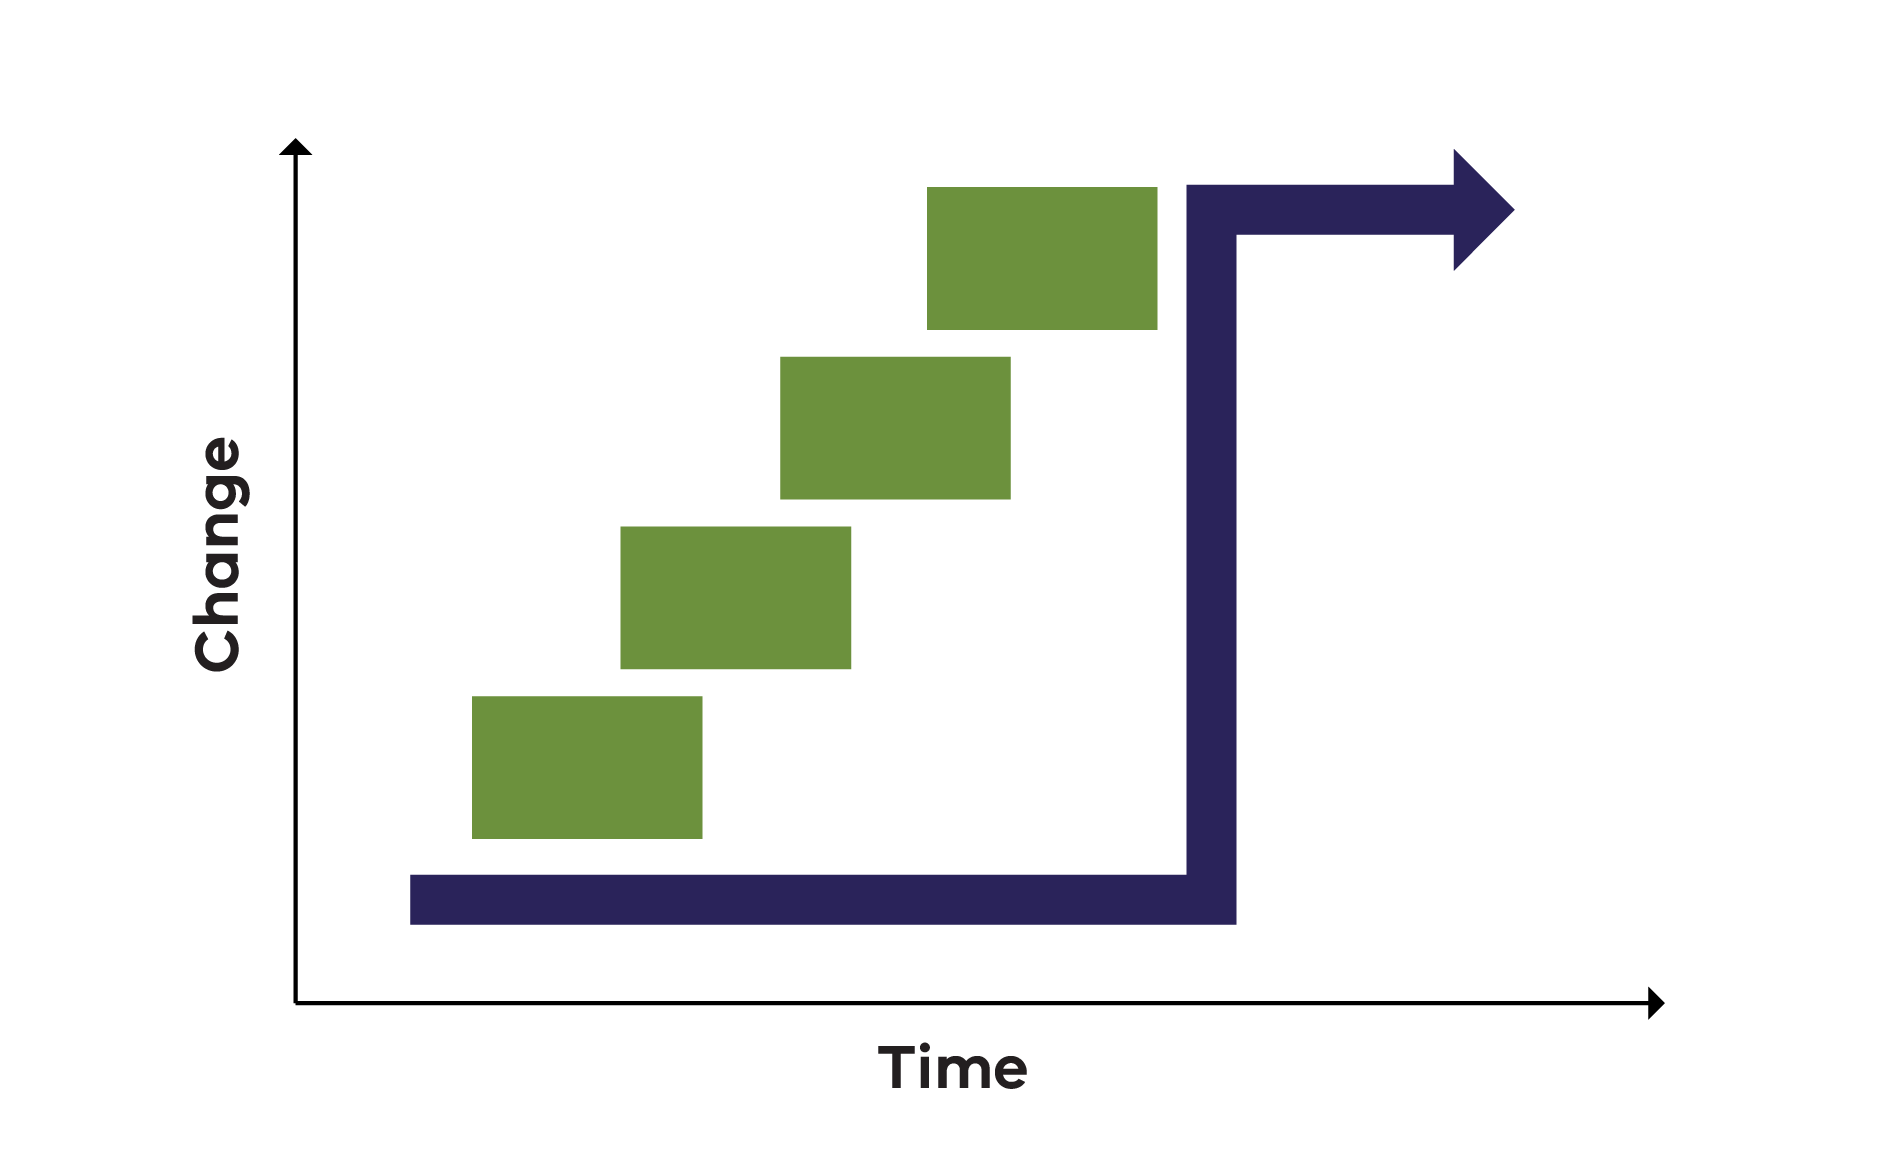 Graph demonstrating the increase in change over time